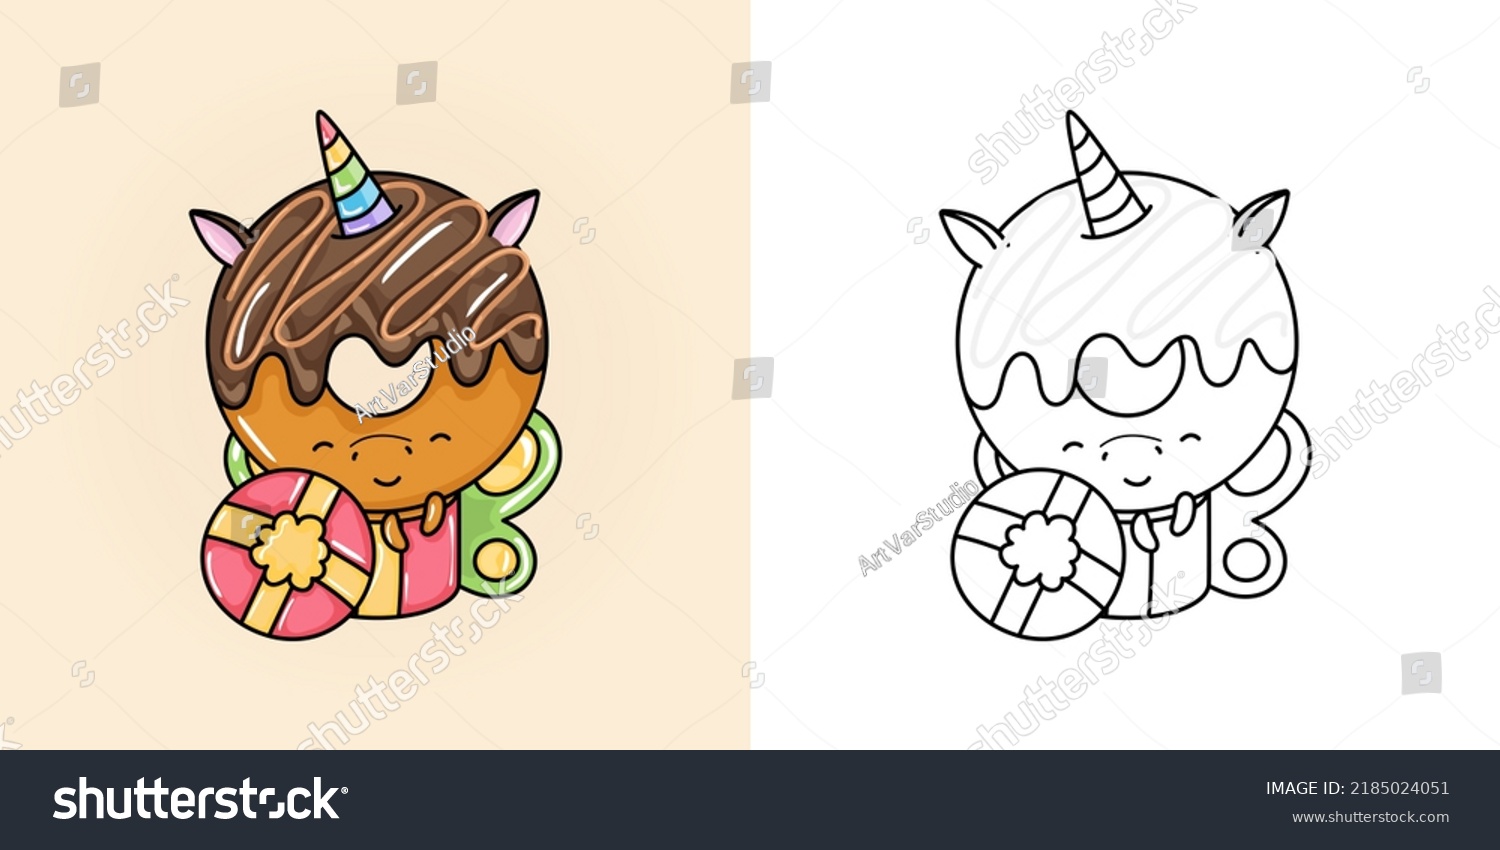 SVG of Cute Clipart Unicorn Illustration and For Coloring Page. Cartoon Clip Art Unicorn Donut. Vector Illustration of a Kawaii Animal for Stickers, Baby Shower, Coloring Pages, Prints for Clothes.
 svg